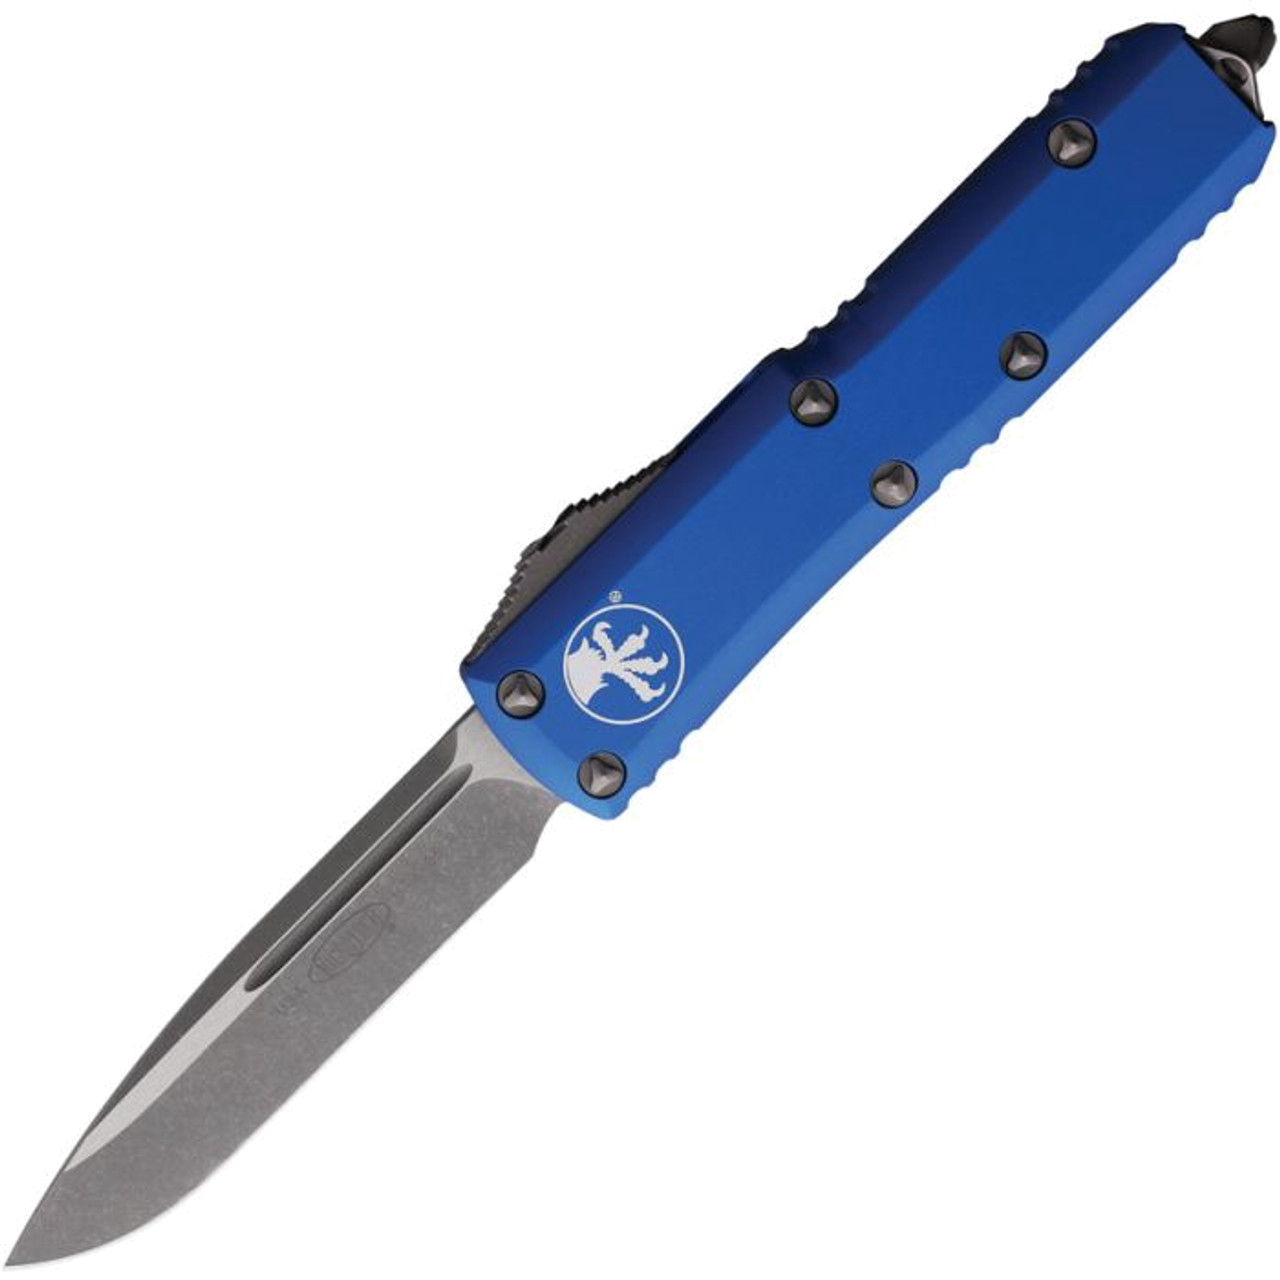 Microtech UTX-85 SE Blue Aluminum MCT23110APBL product image